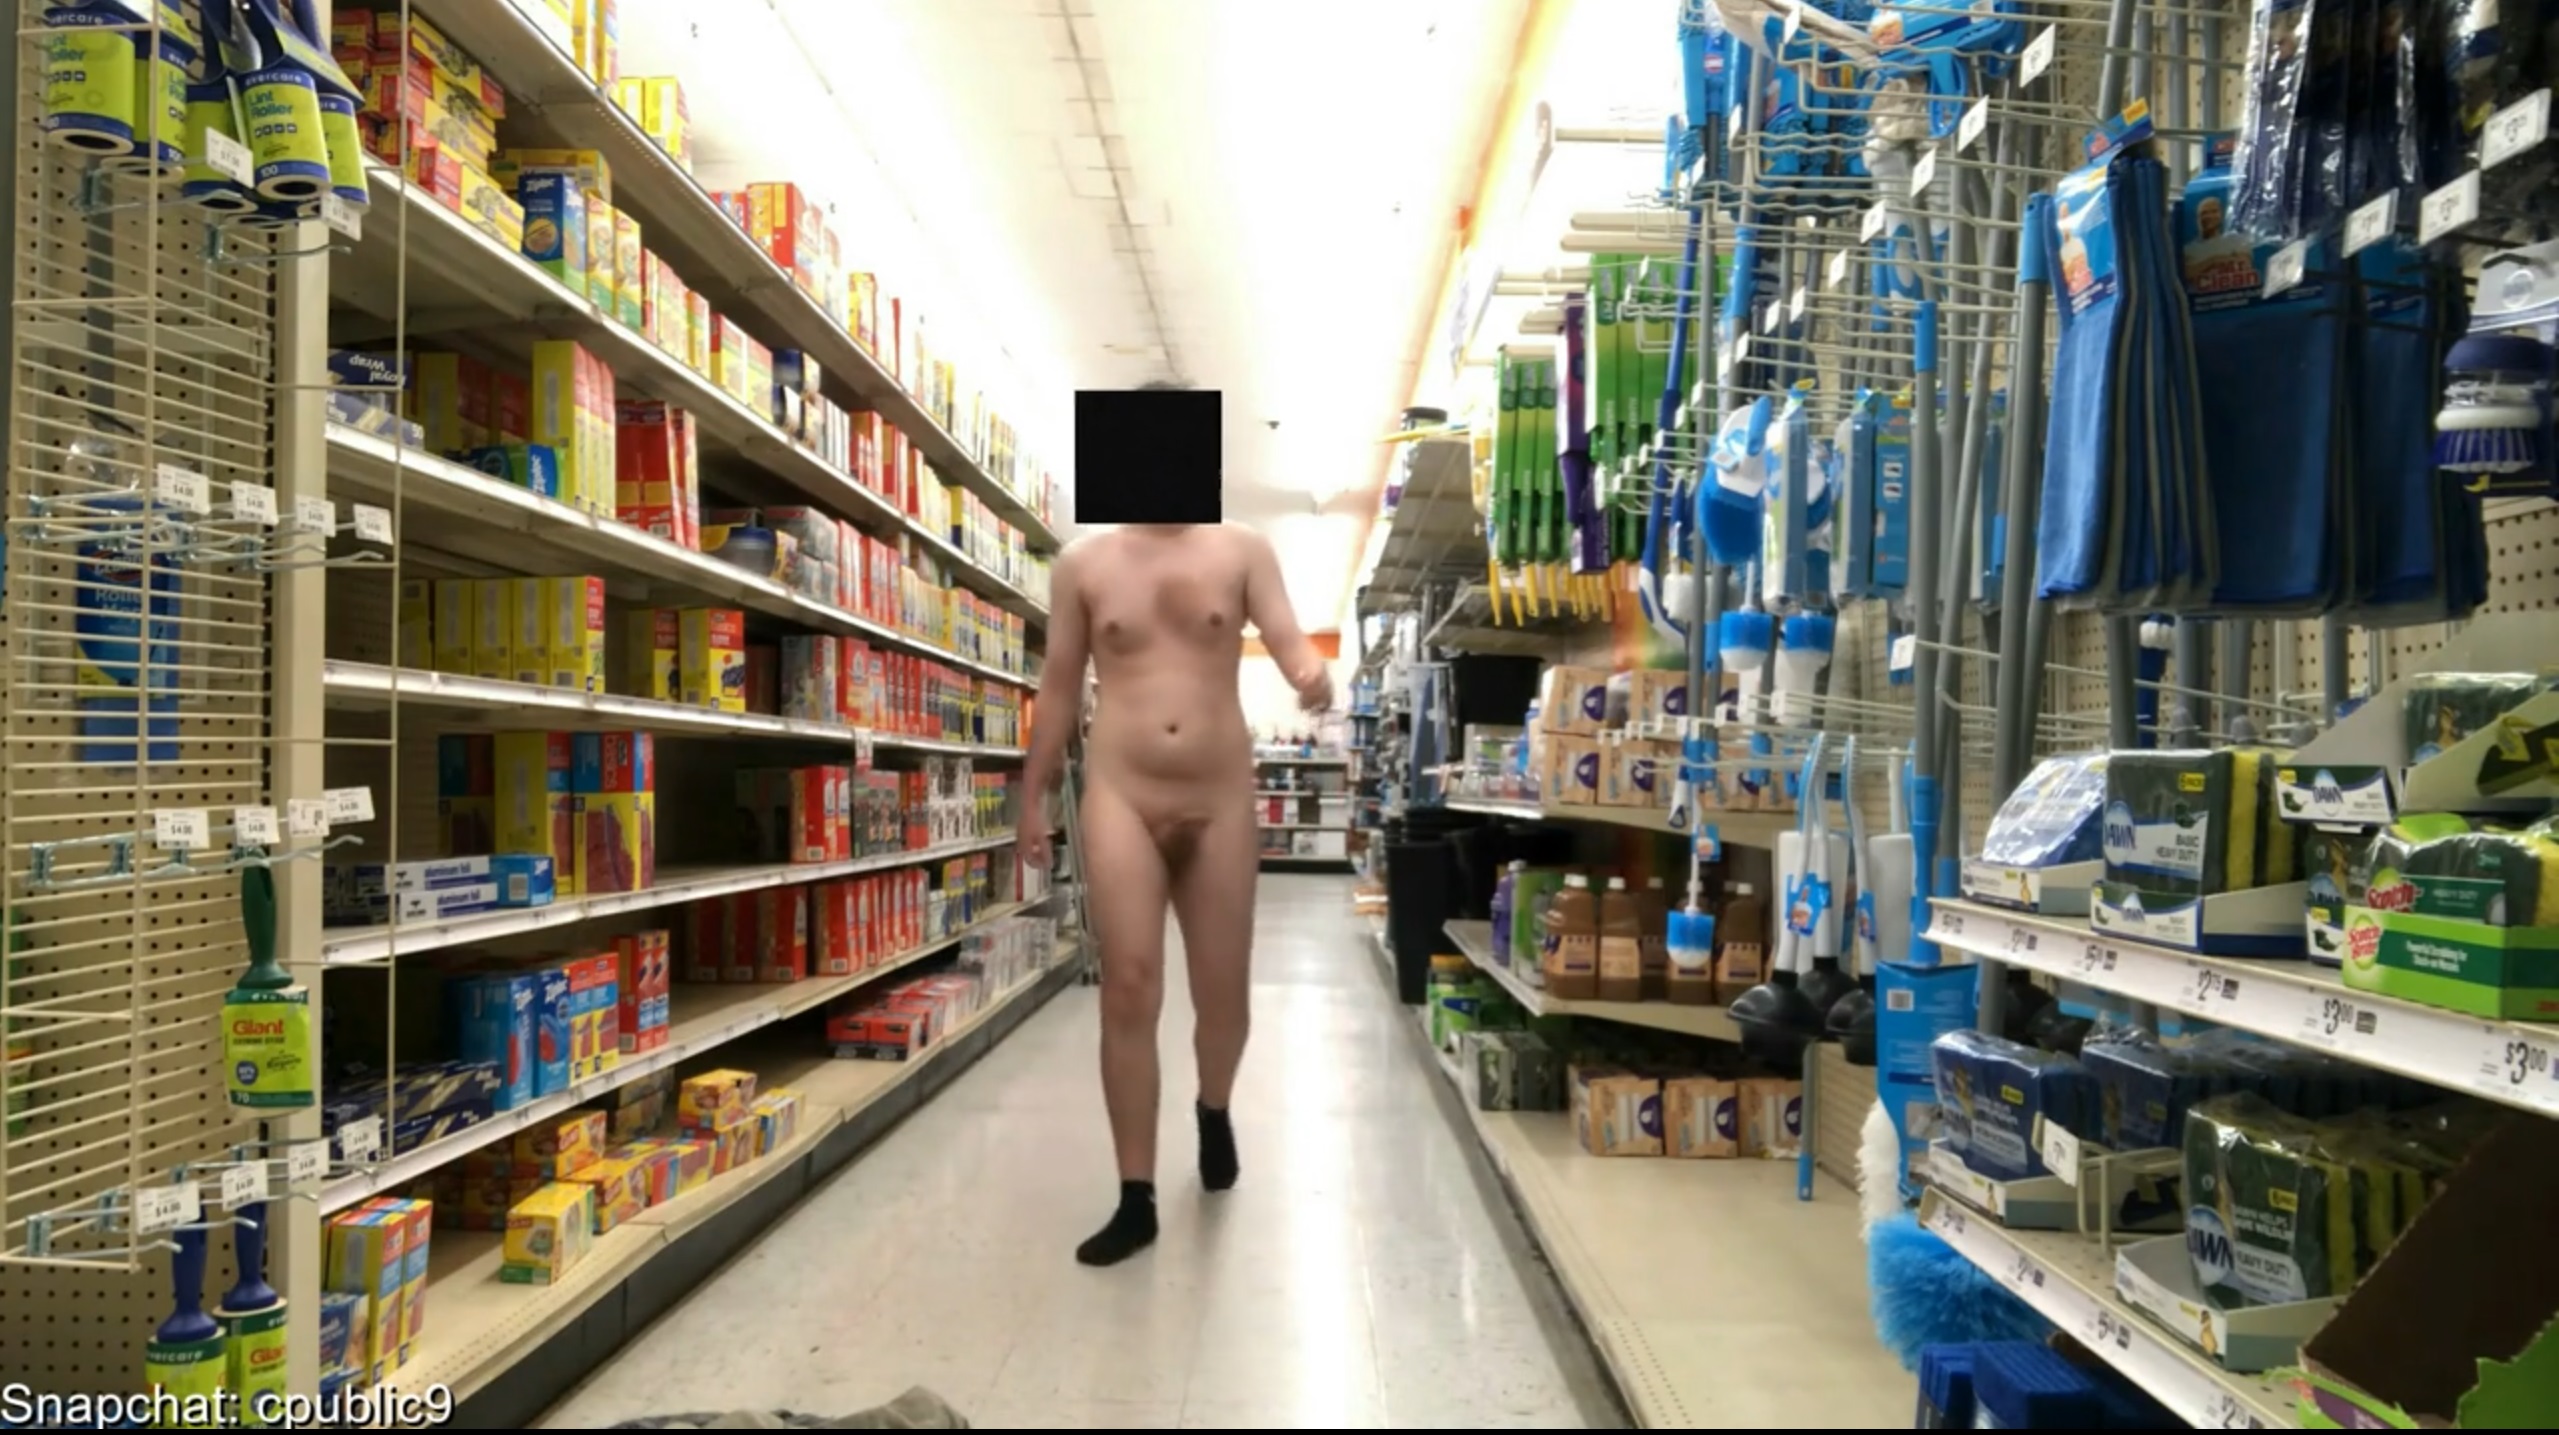 Caught flashing people and cuming in a store picture